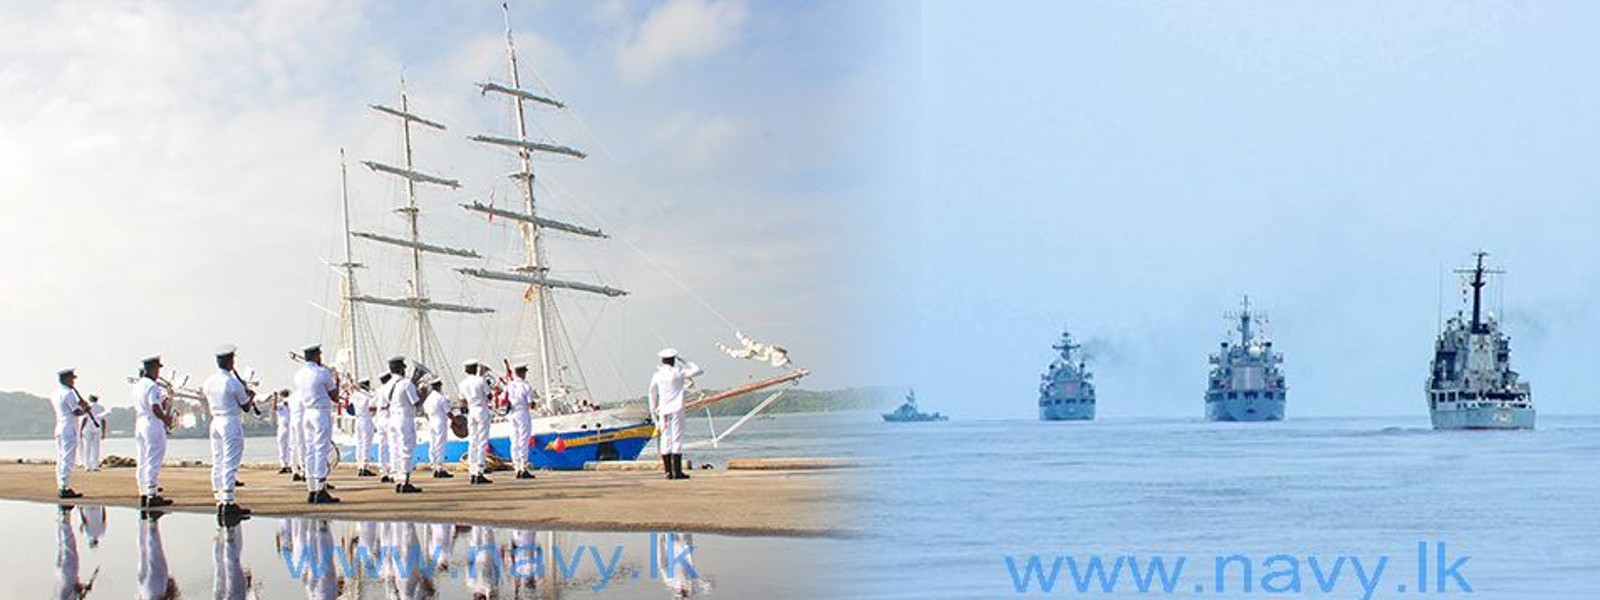 First Training Squadron of Indian Navy departs the island